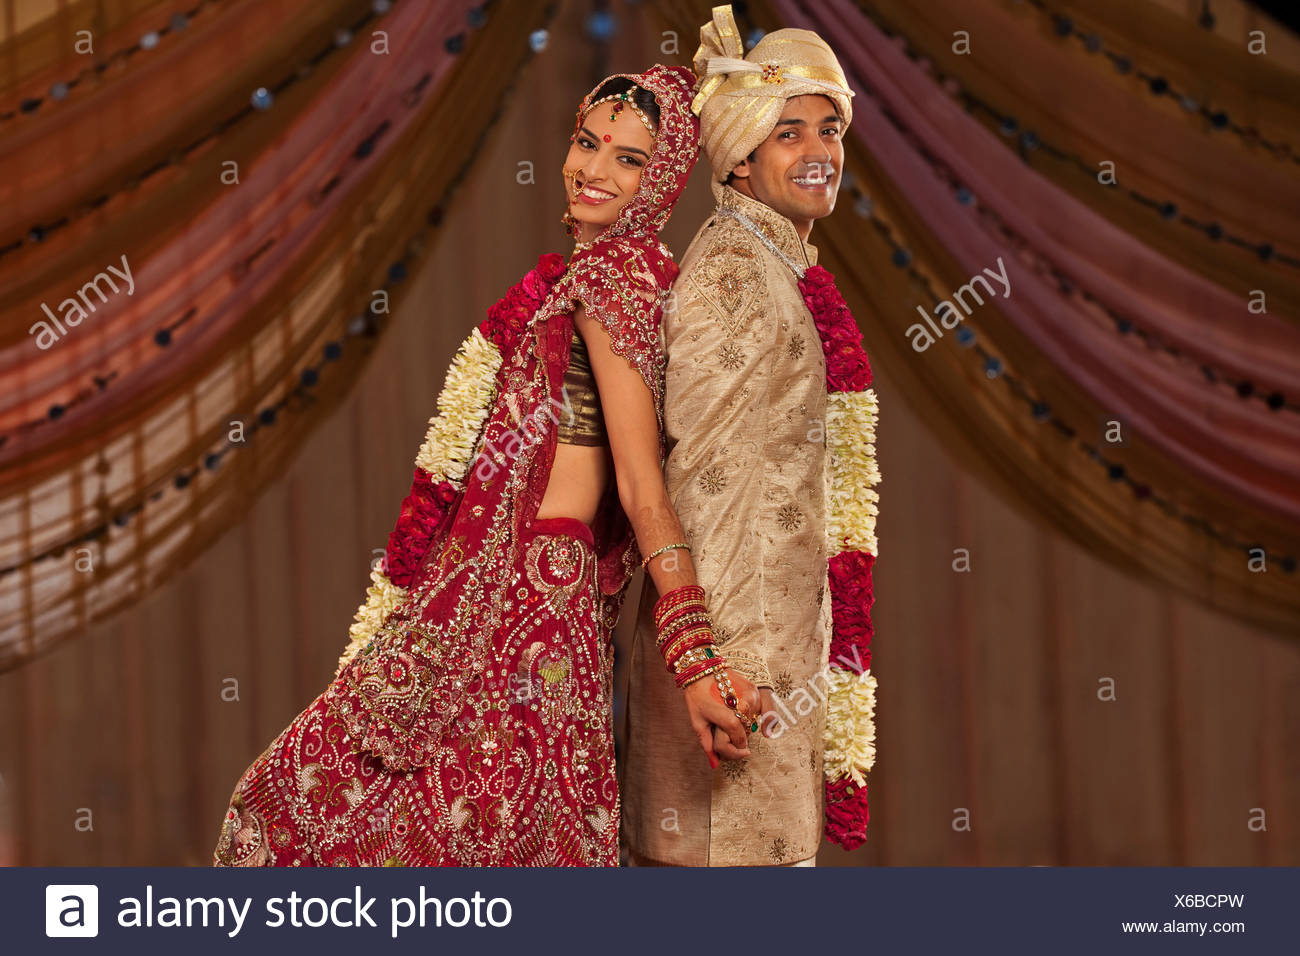 Newly Married Couples High Resolution Stock Photography And Images Alamy I know, that together we can come to a right answer. https www alamy com portrait of newly married indian couple holding hands image279305345 html